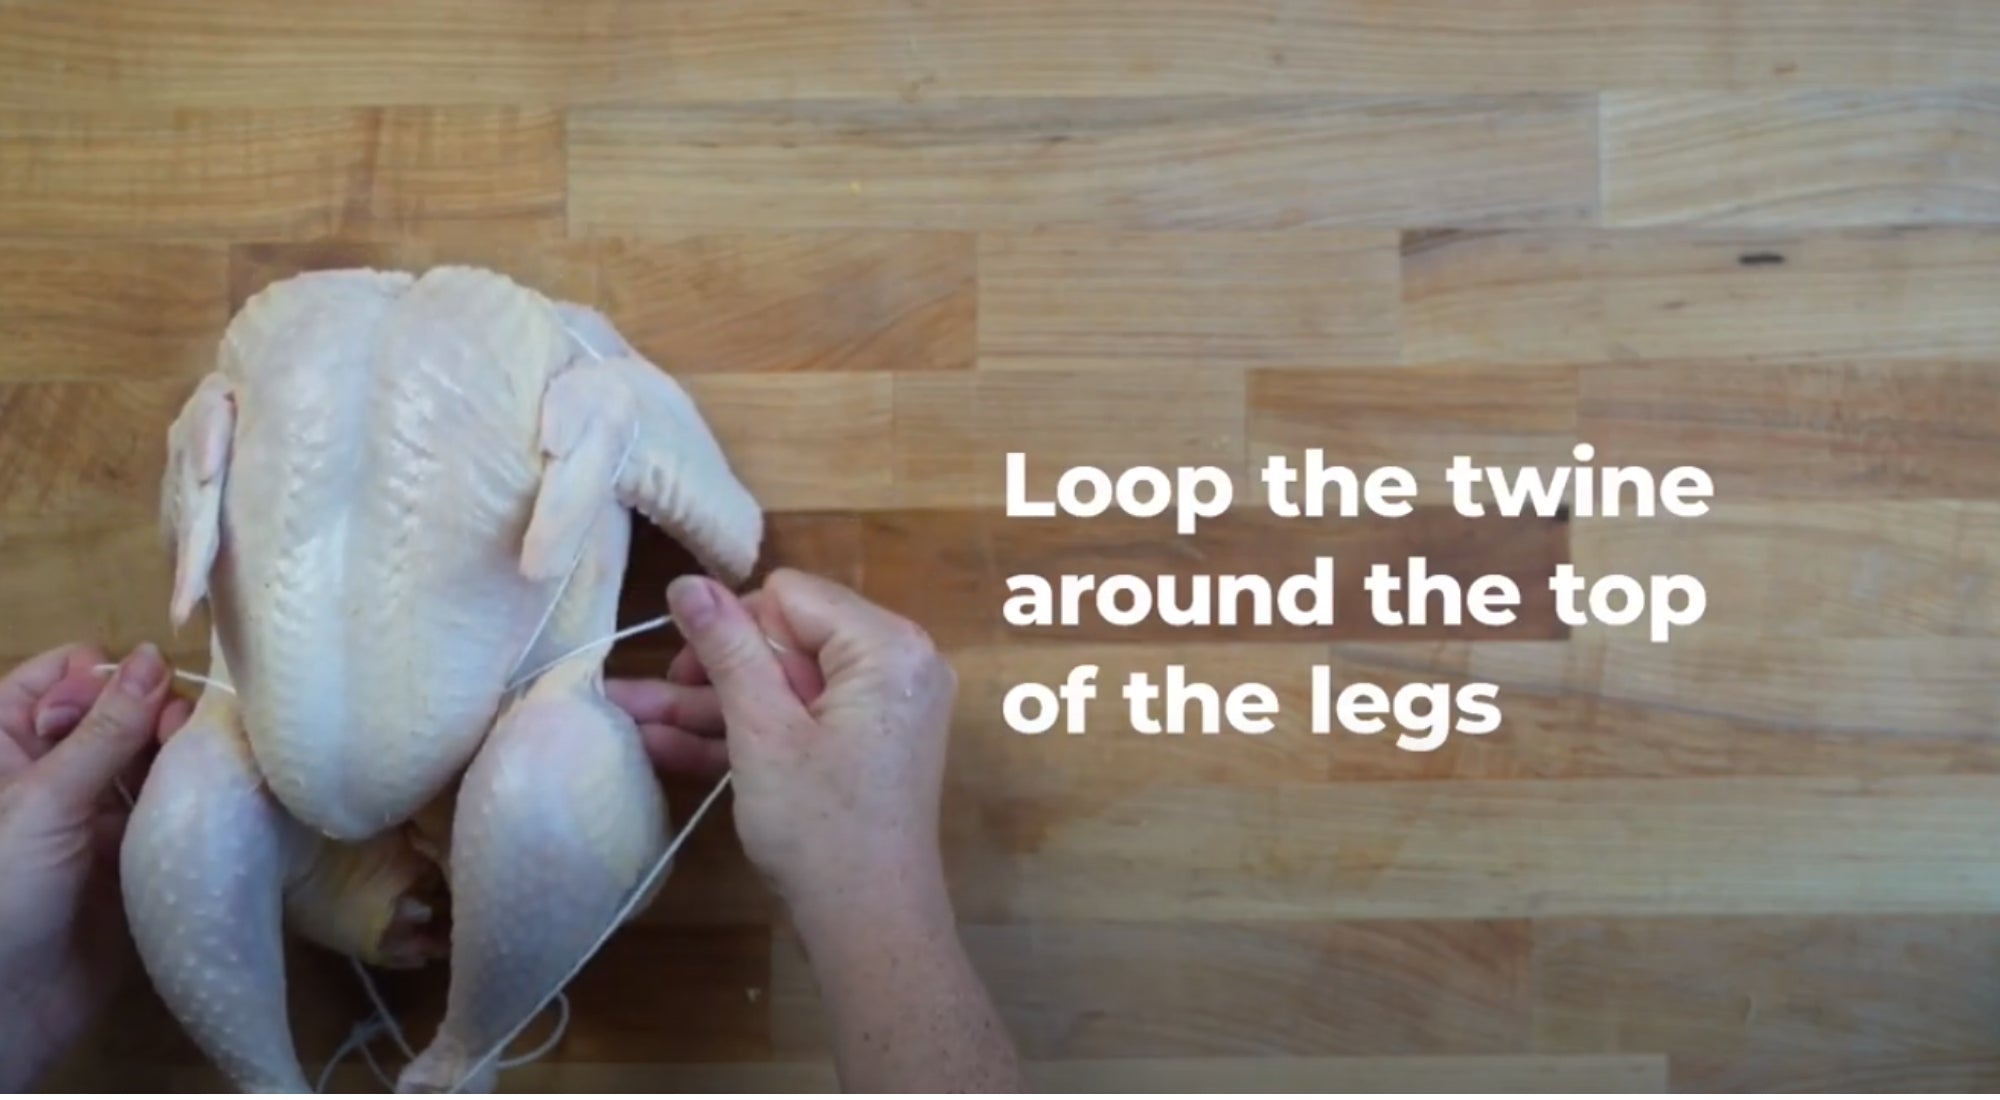 How To Truss Your Rotisserie Chicken with Butcher's Twine